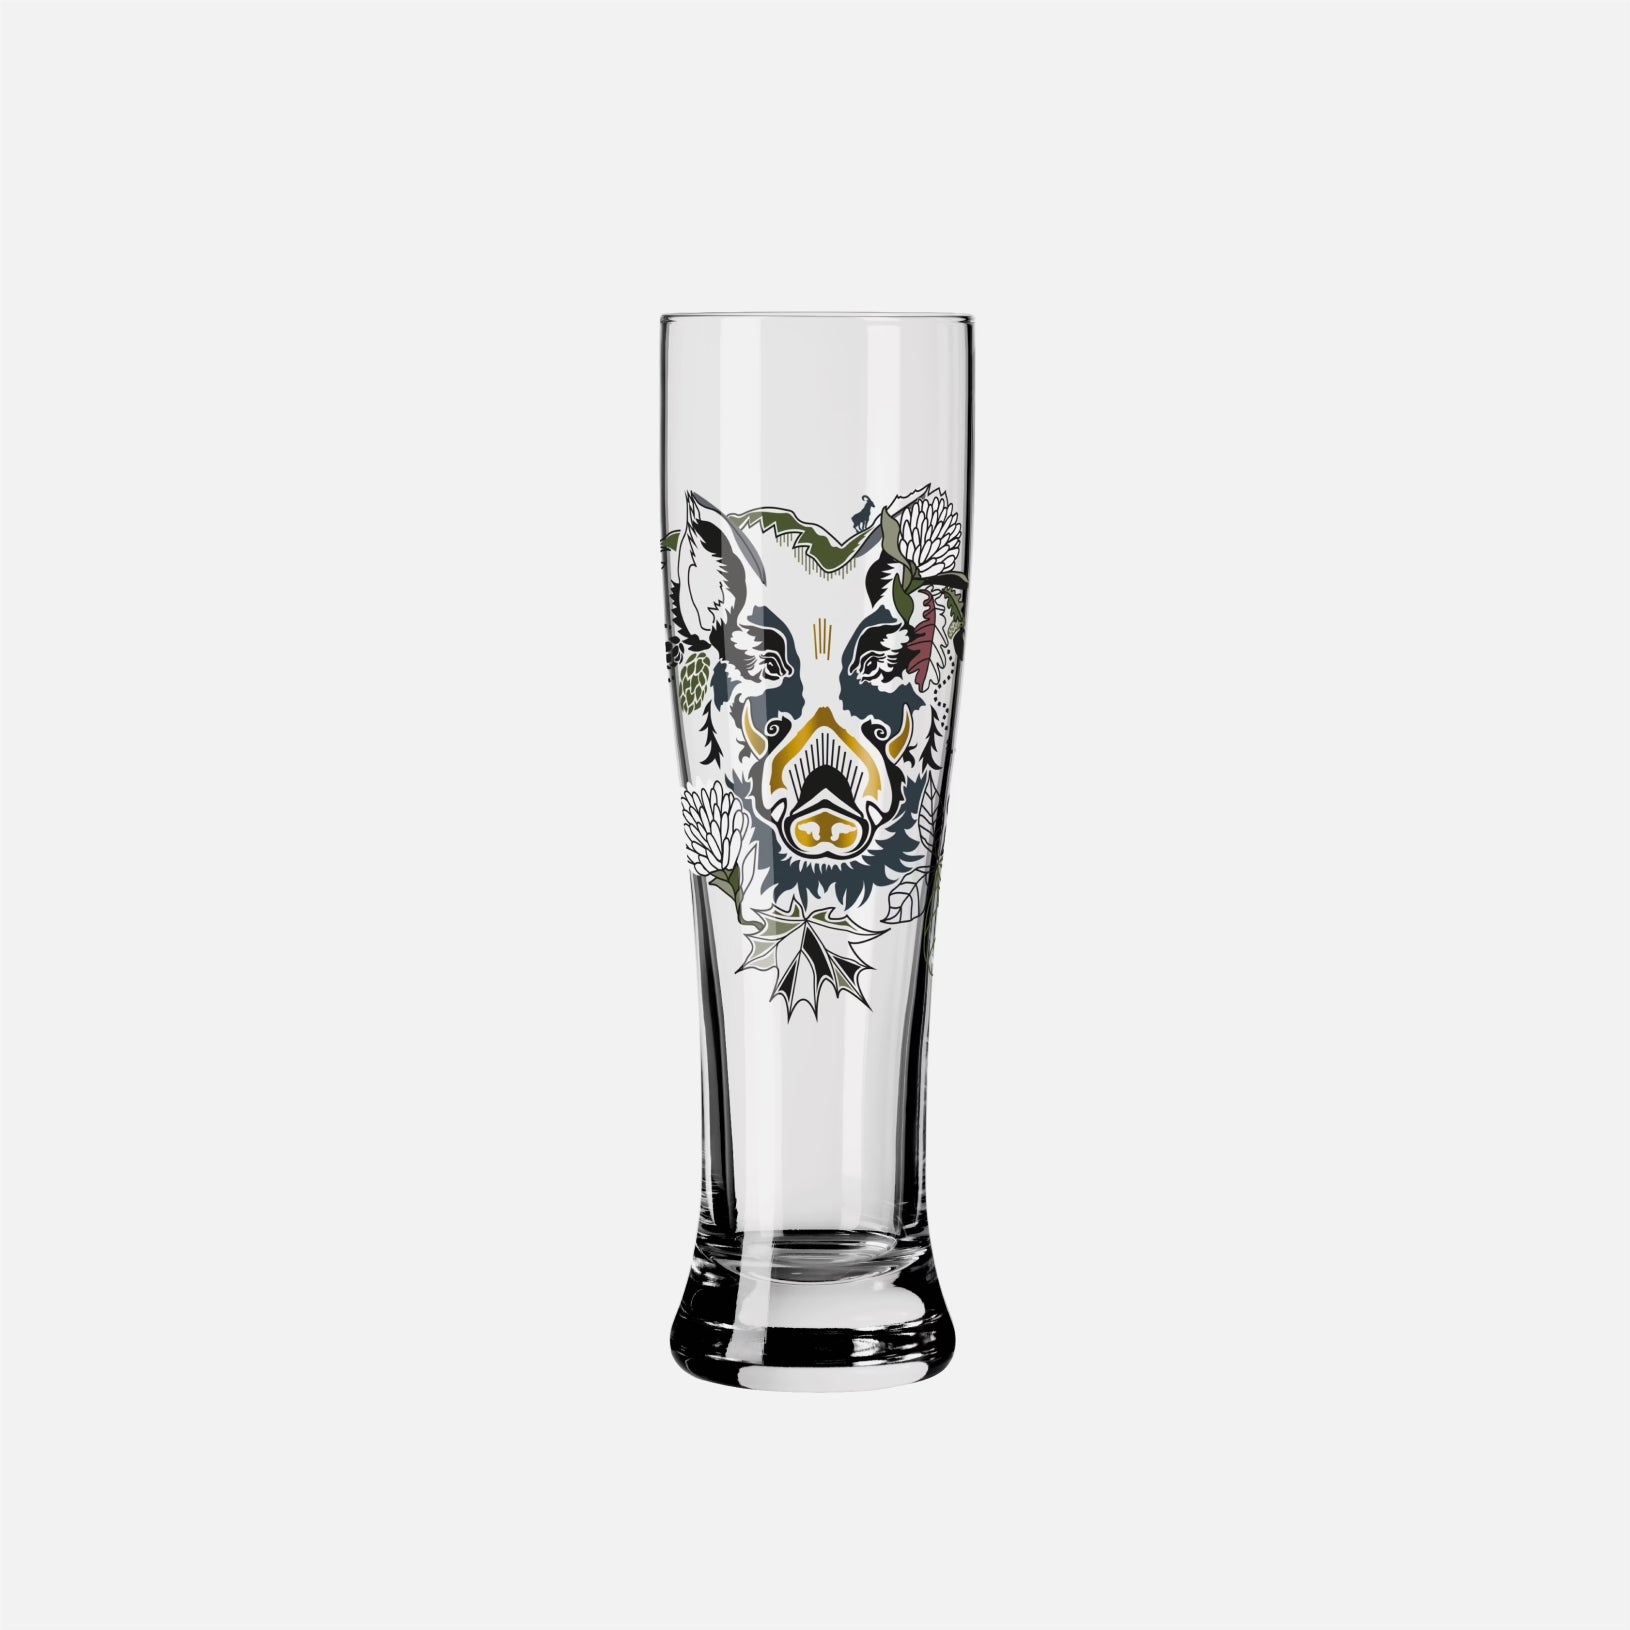 Usage Time Wheat Beer Glass - Petra Mohr #4